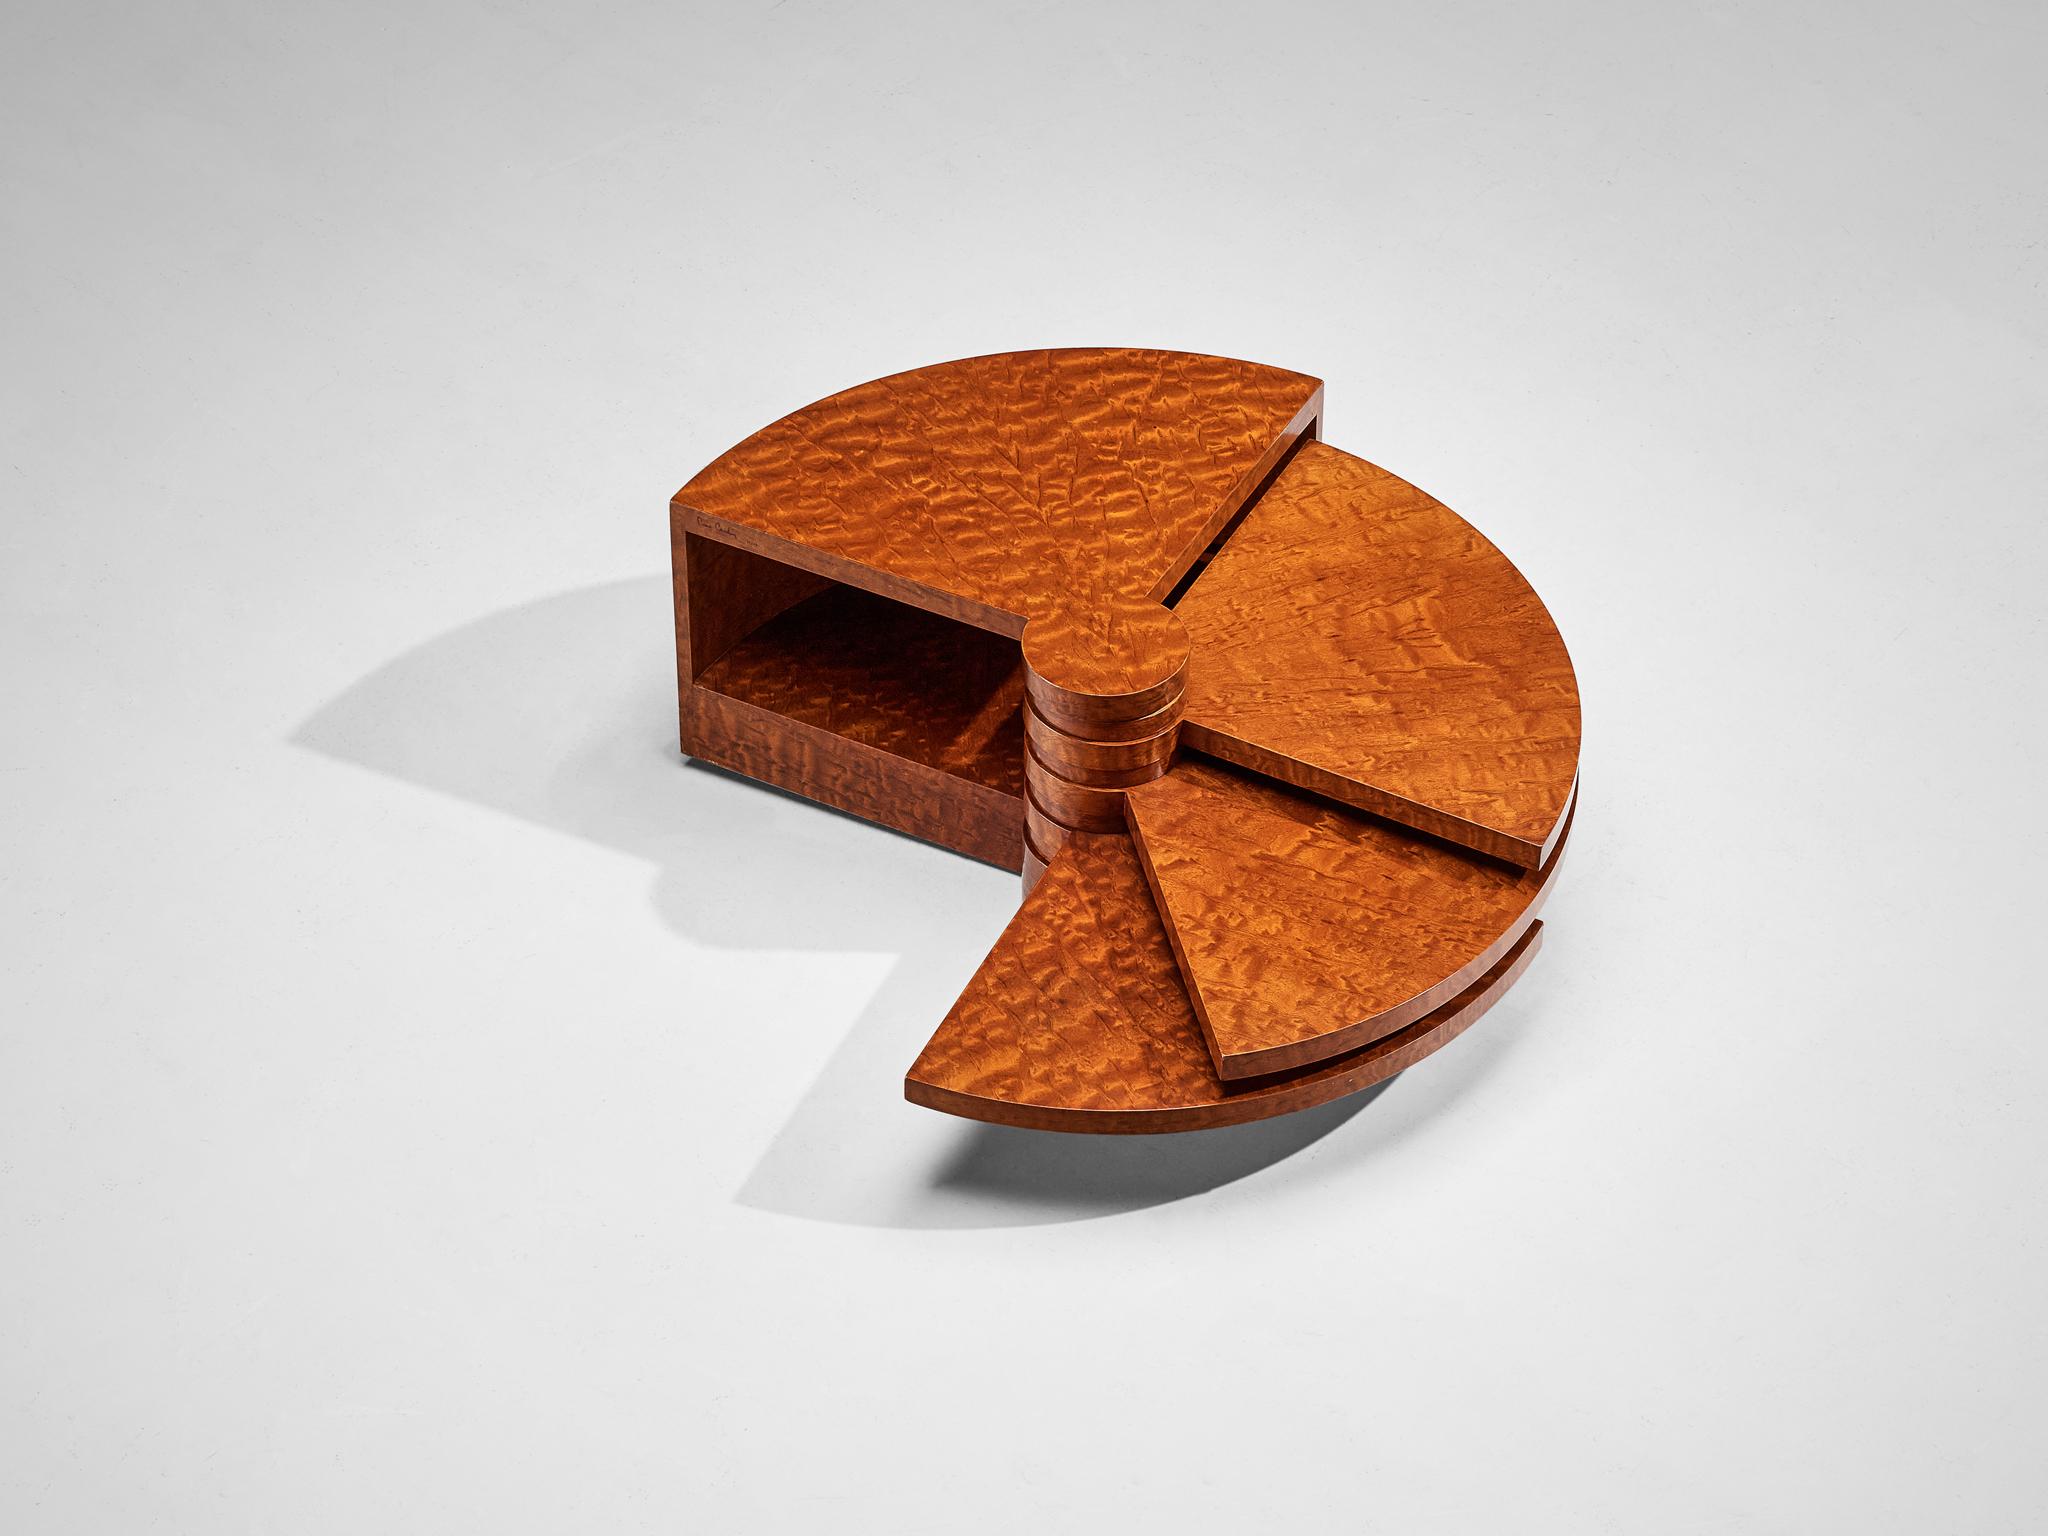 Pierre Cardin for Francia, 'Eventail (fan) coffee table, mahogany, France, 1984

A rare masterpiece designed by the the groundbreaking fashion designer Pierre Cardin (1922 - 2020). Cardin was a world famous fashion designer, but also enjoyed great